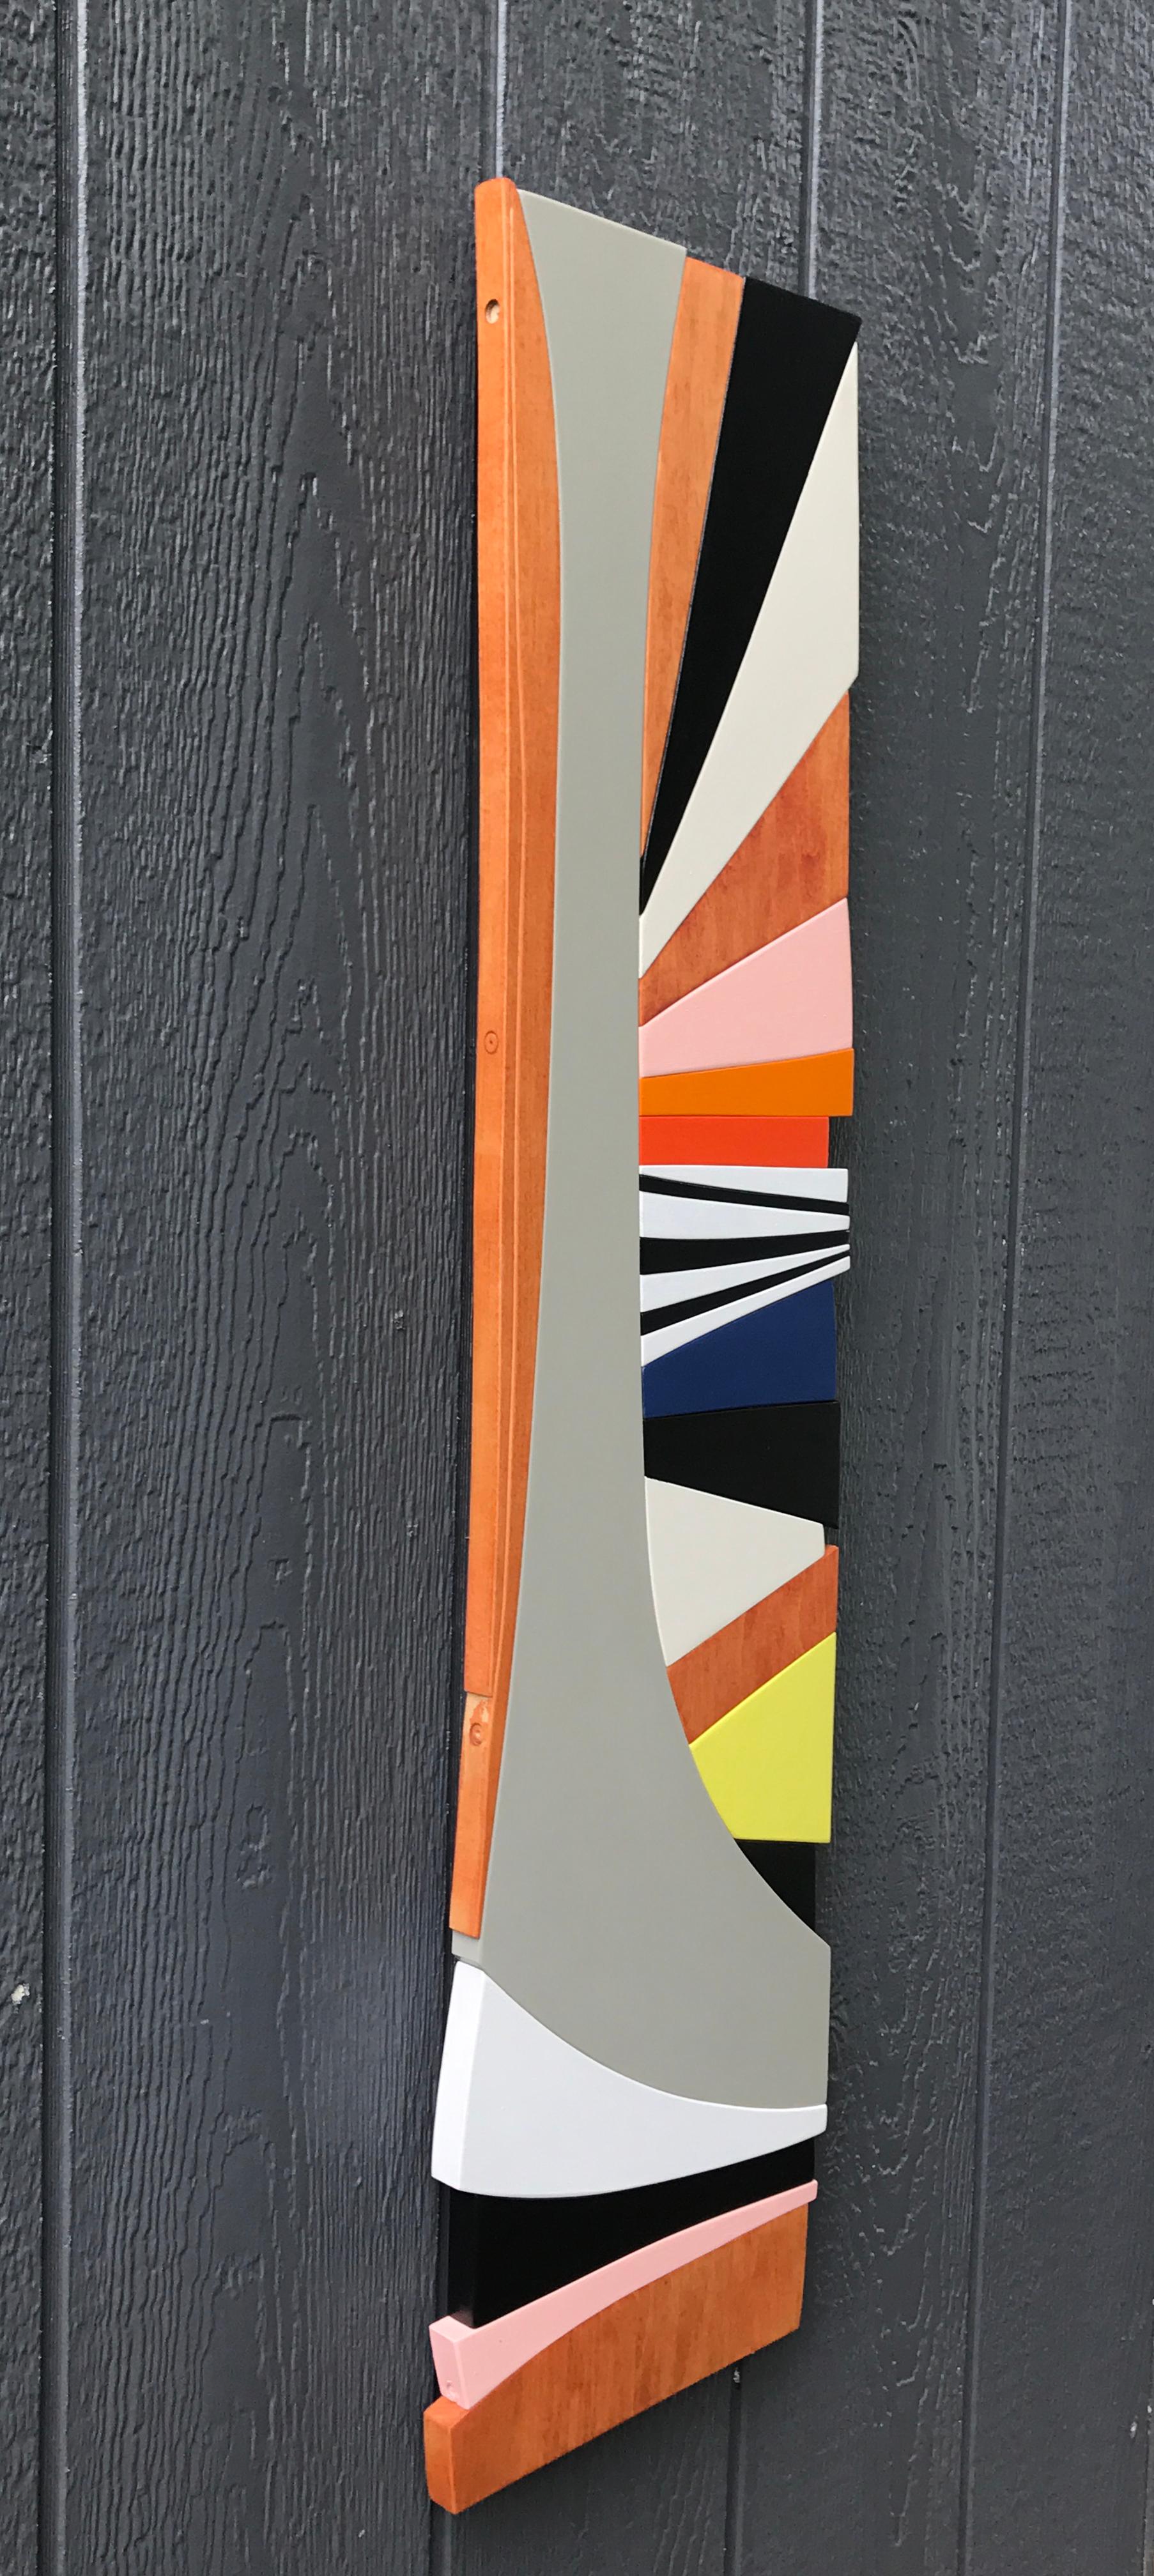 <p>Artist Comments<br>Deco is a modern, Art Deco inspired wall sculpture.  The clean lines and colorful palette suggest the modern aesthetic of that era.  It was created from one single piece of maple wood that I repurposed from a 60 year old dining